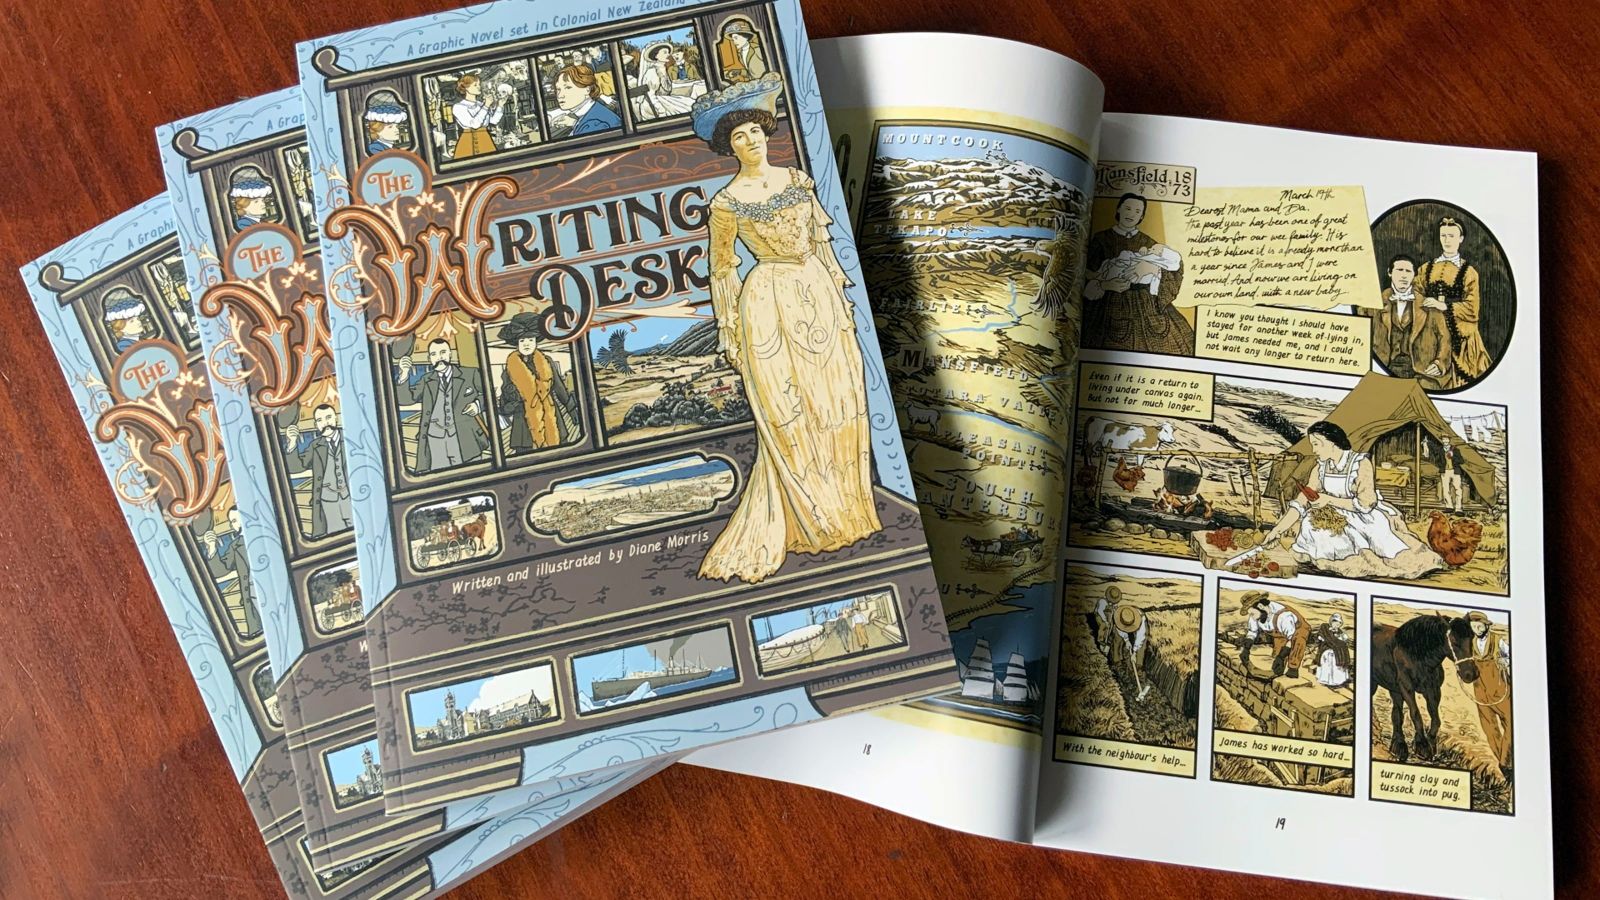 A top-down image of The Writing Desk front cover and inside page, showing characters in period dress in settler Aotearoa.